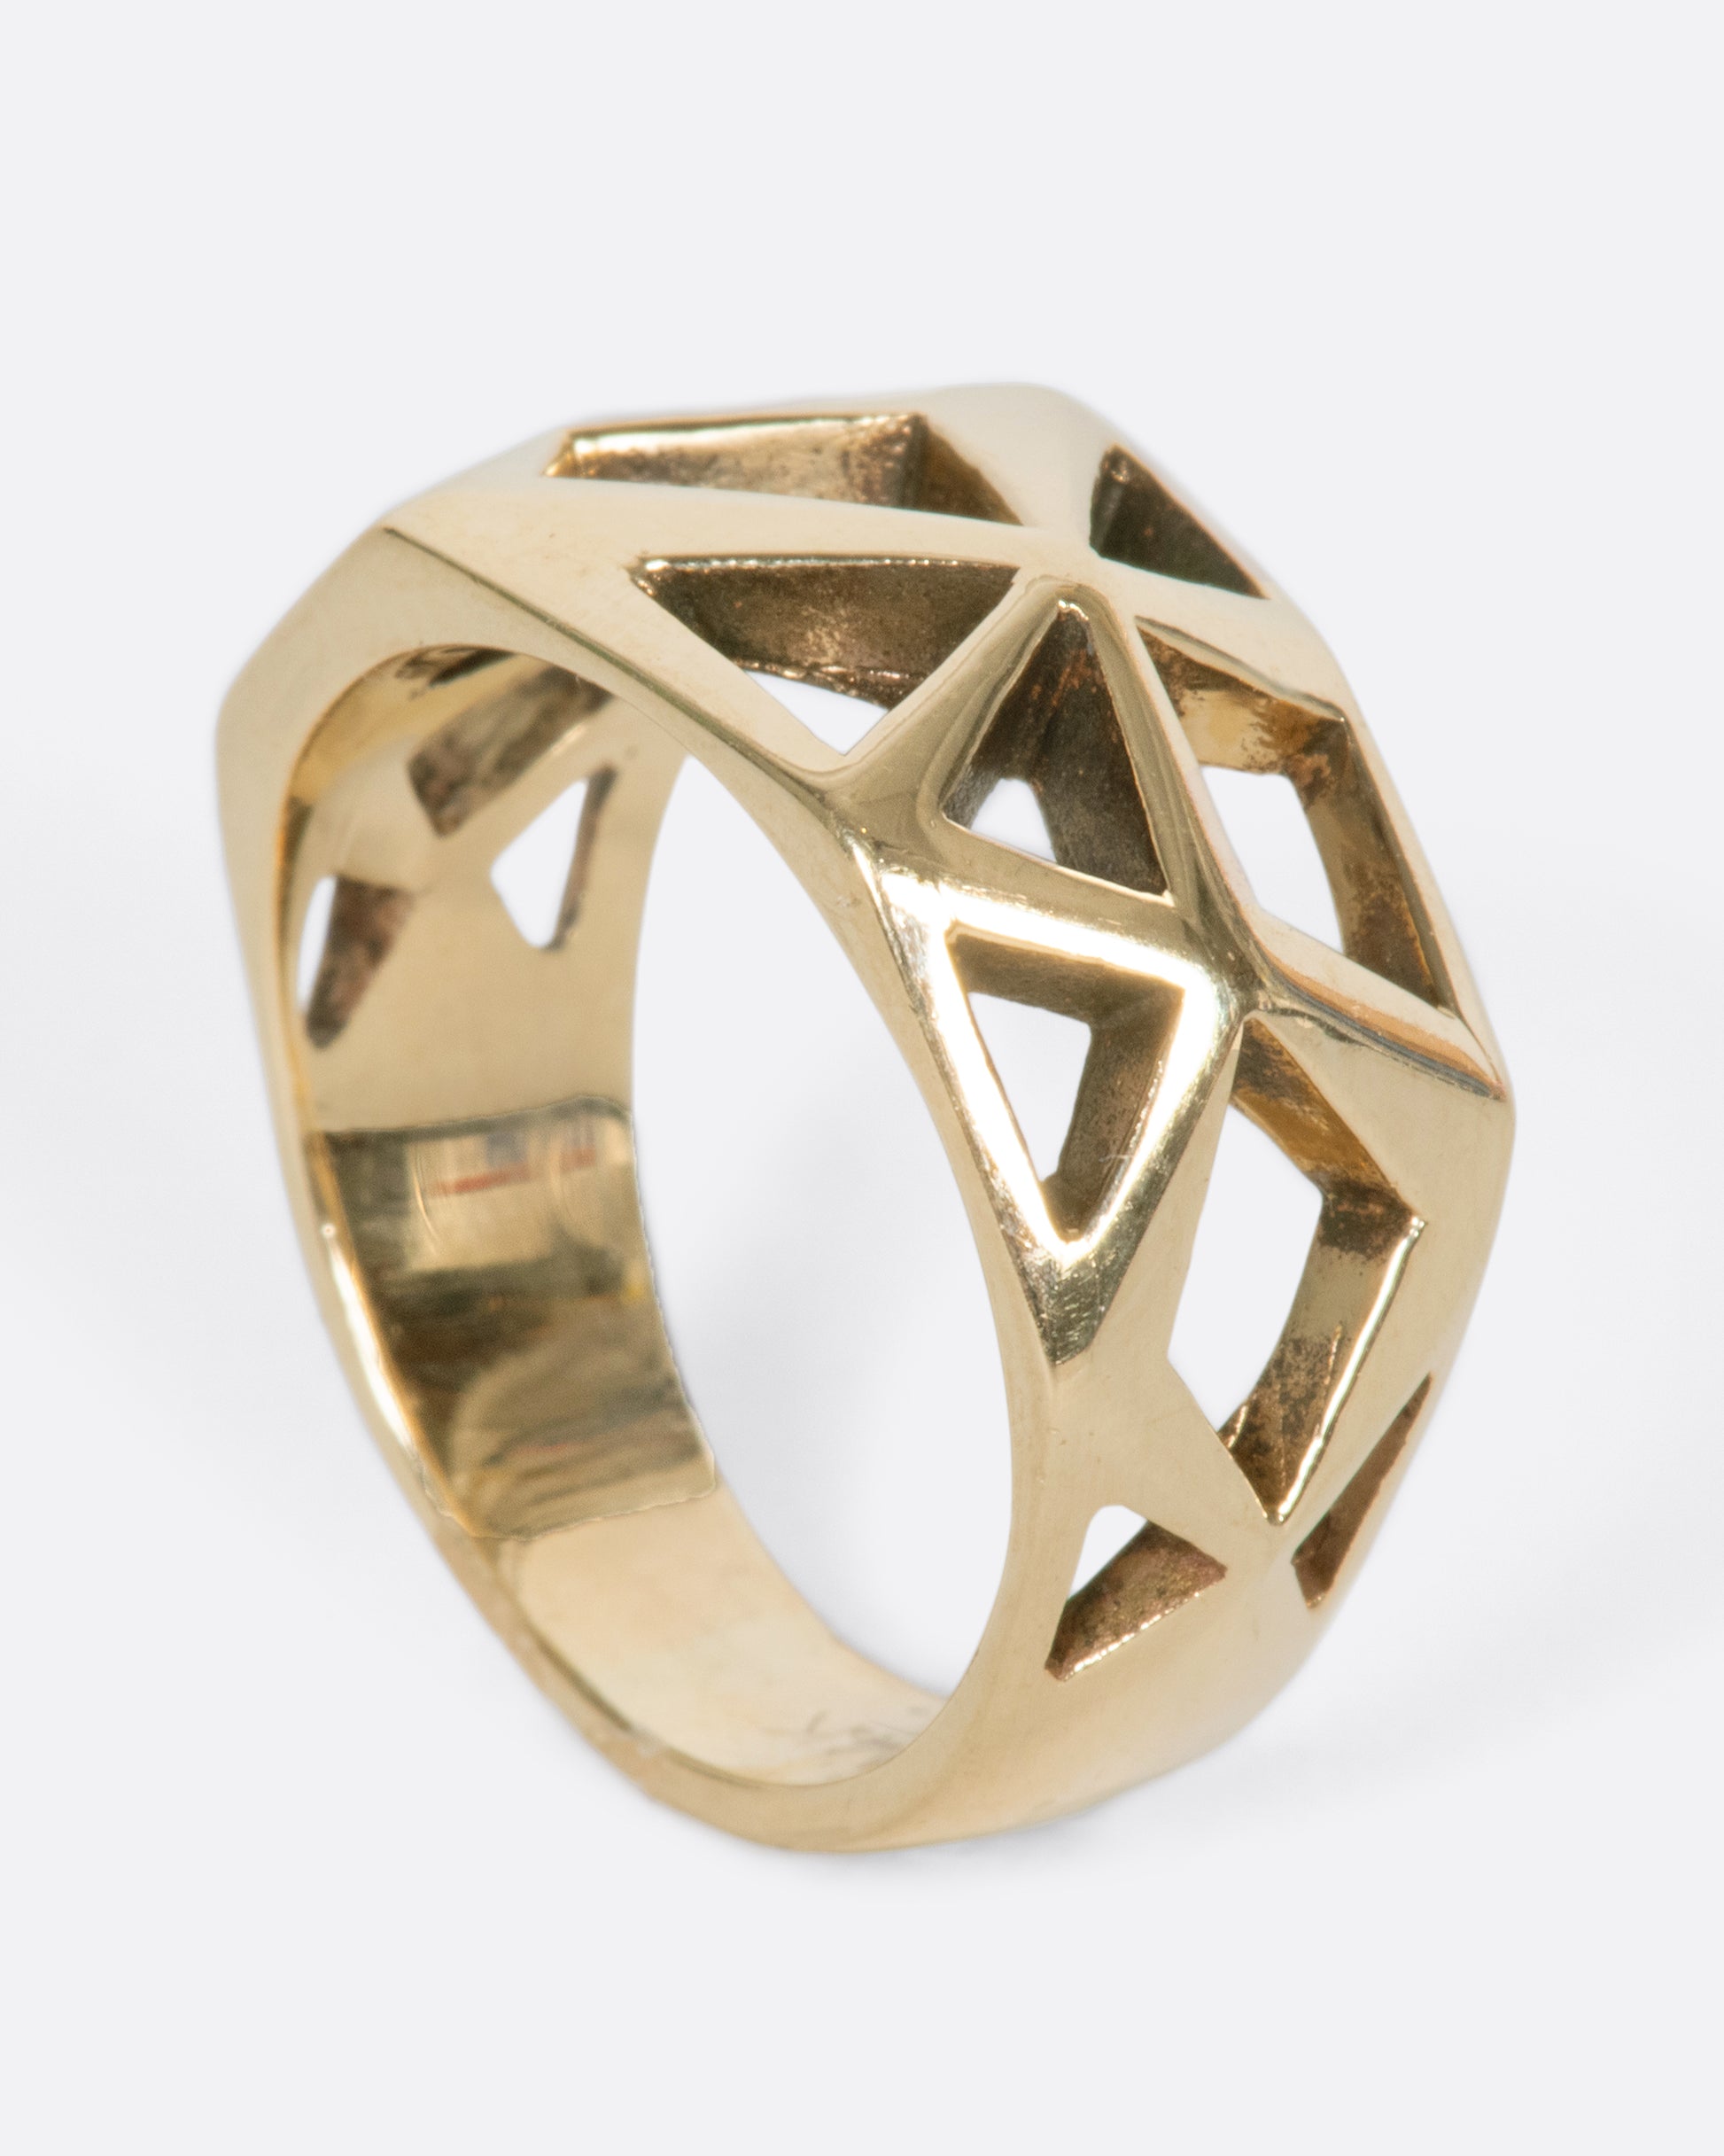 A vintage yellow gold ring with a raised, faceted face that has geometric cutouts throughout.